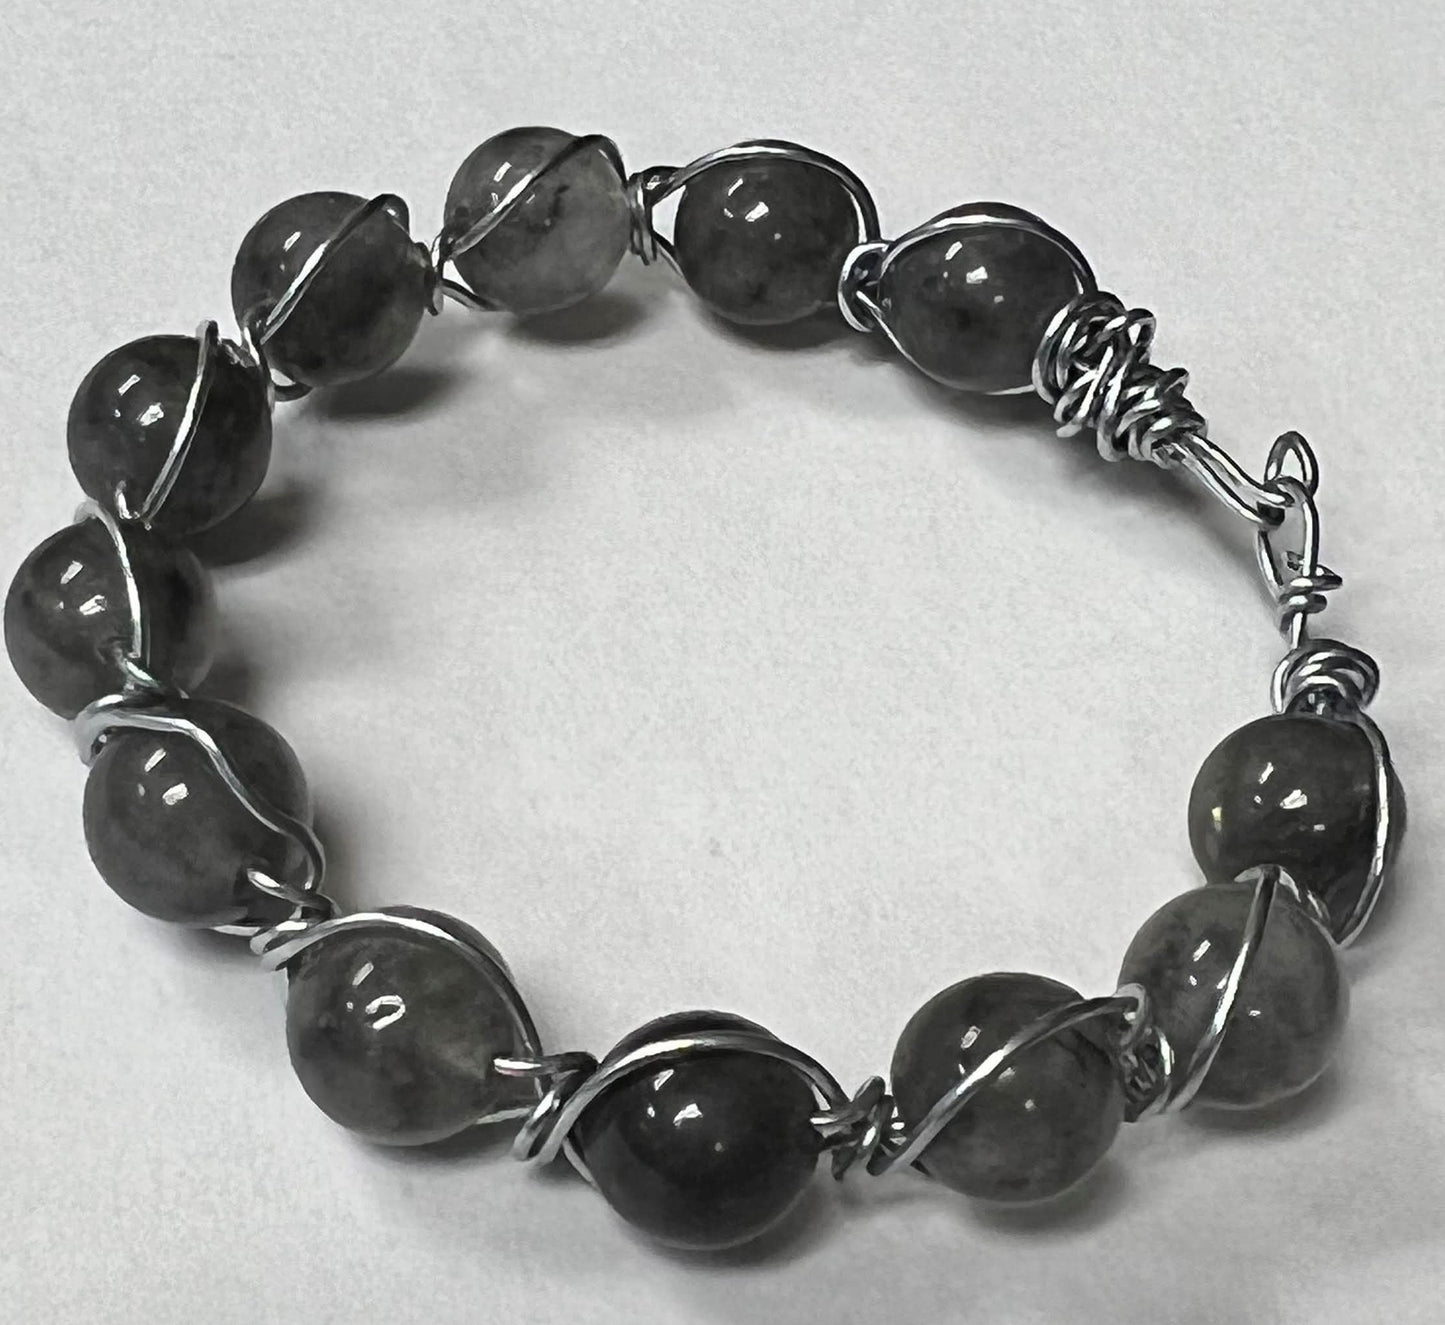 Gray Quartz Bracelet 8.5") -Excellent for unblocking energy or treating any condition. Helps to facilitate growth & awareness. Excellent stone for meditation & brings clarity.